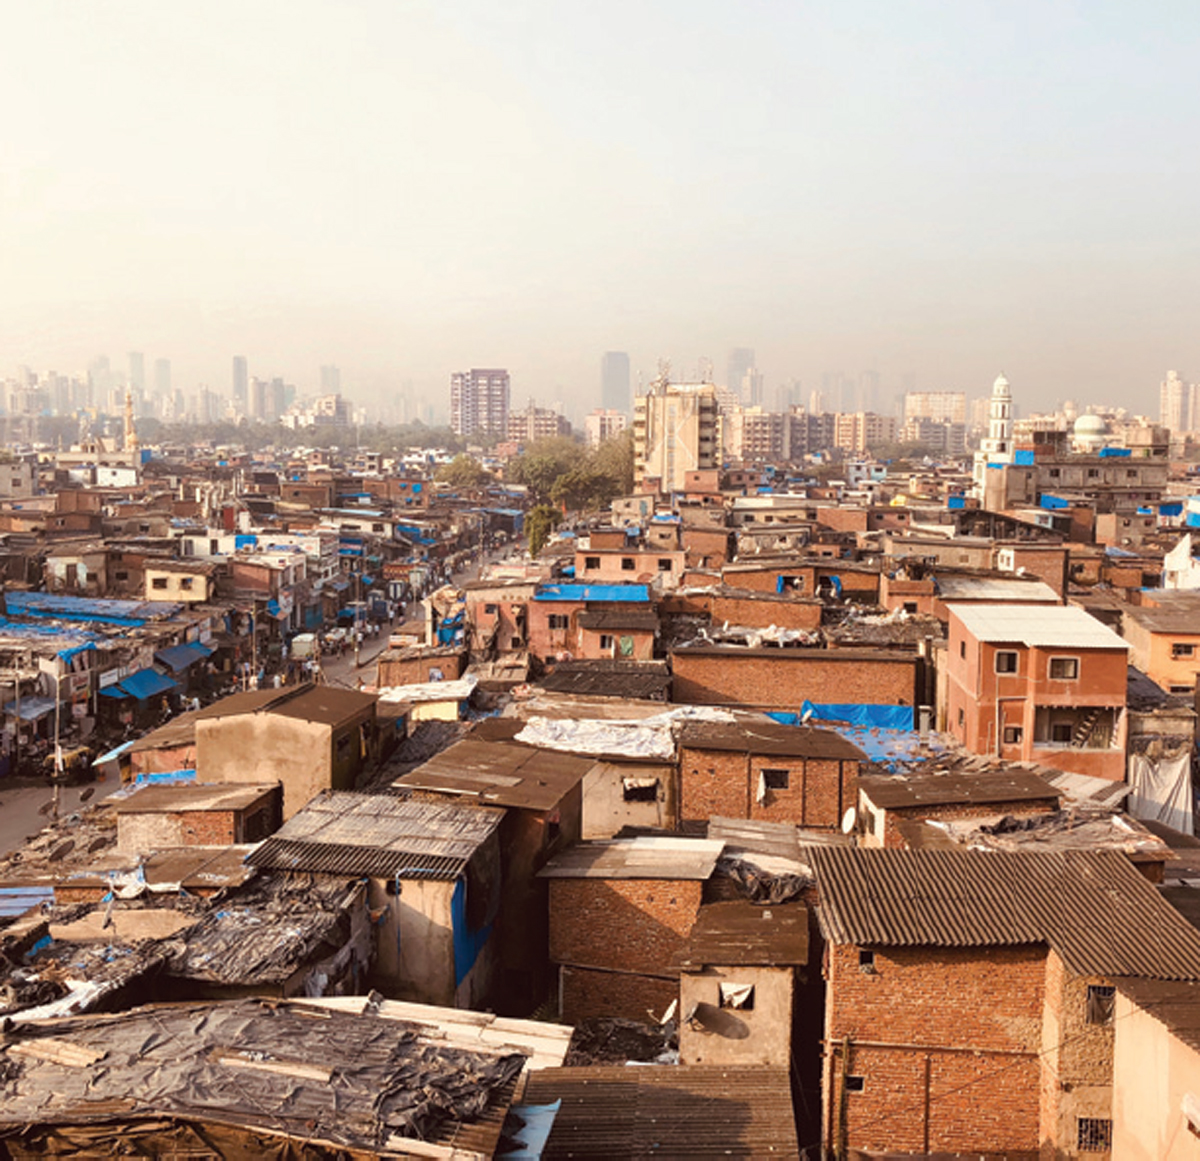 Rooftops in Mumbai, India, often use corrugated metal sheets that absorb heat